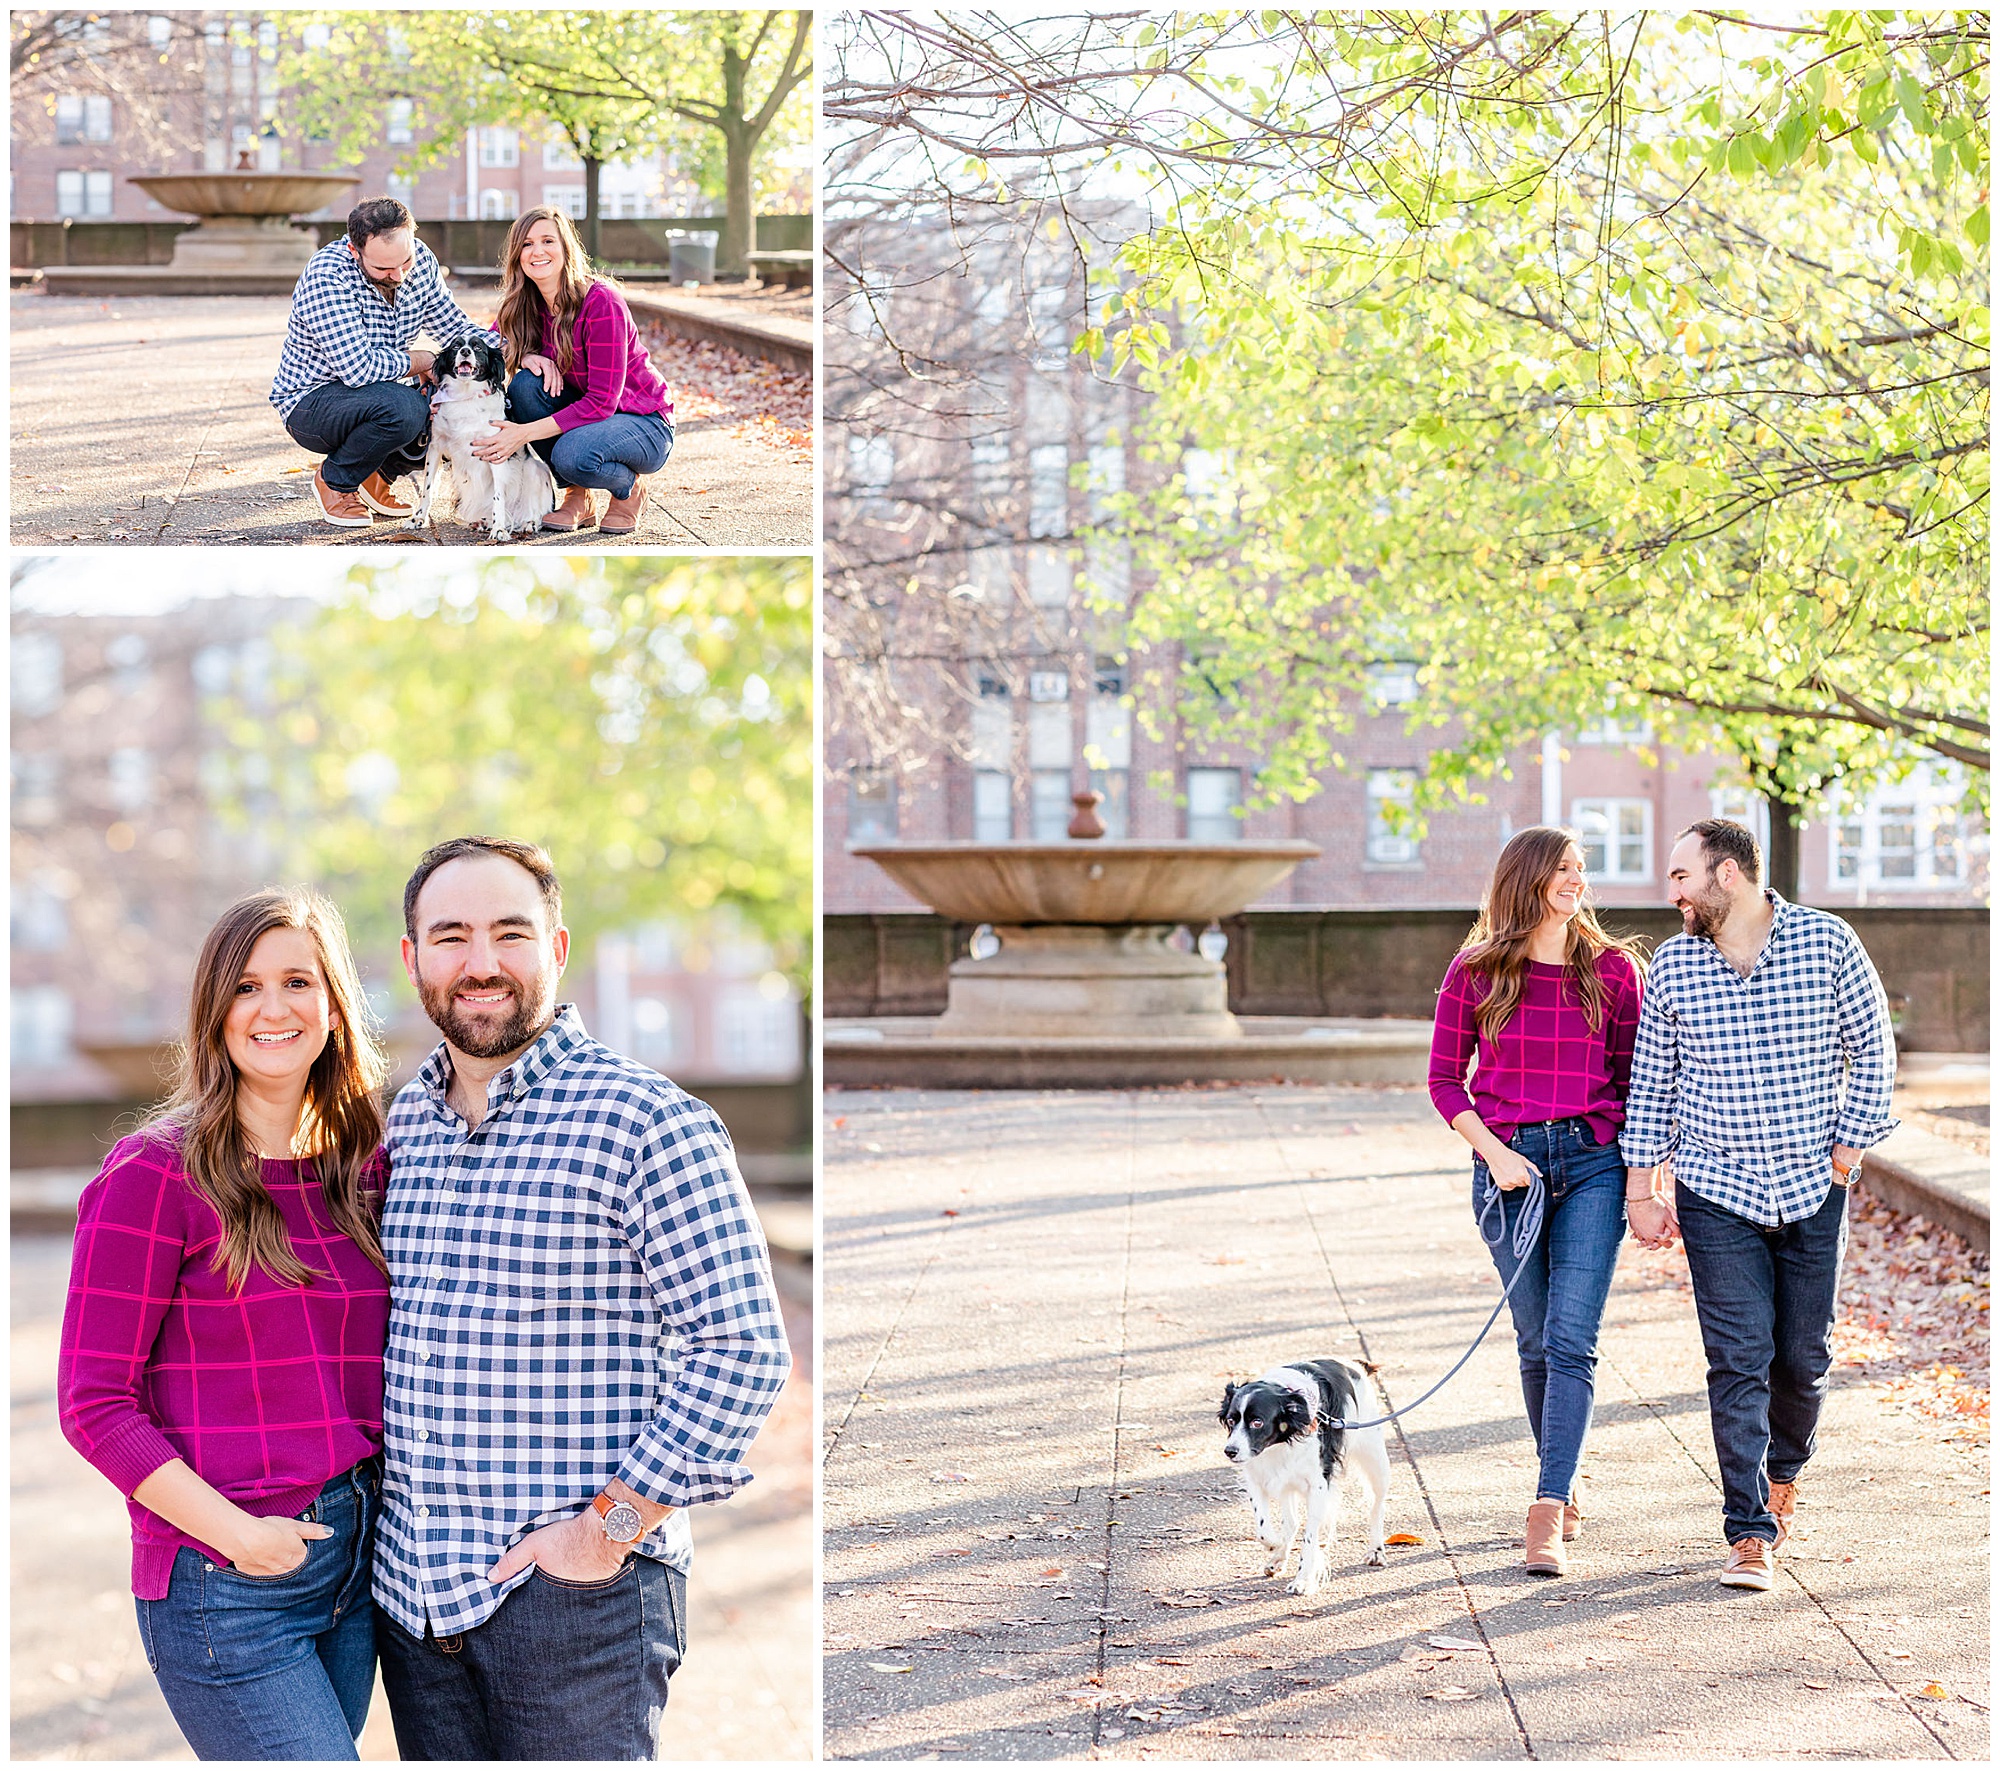 Meridian Hill Park engagement session, Meridian Hill Park DC, DC engagement photography, DC engagement photos, DC engagement session, DC engagement photographer, DC proposal photographer, DC wedding photographer, autumn engagement photos, Rachel E.H. Photography, couple petting dog, couple walking dog